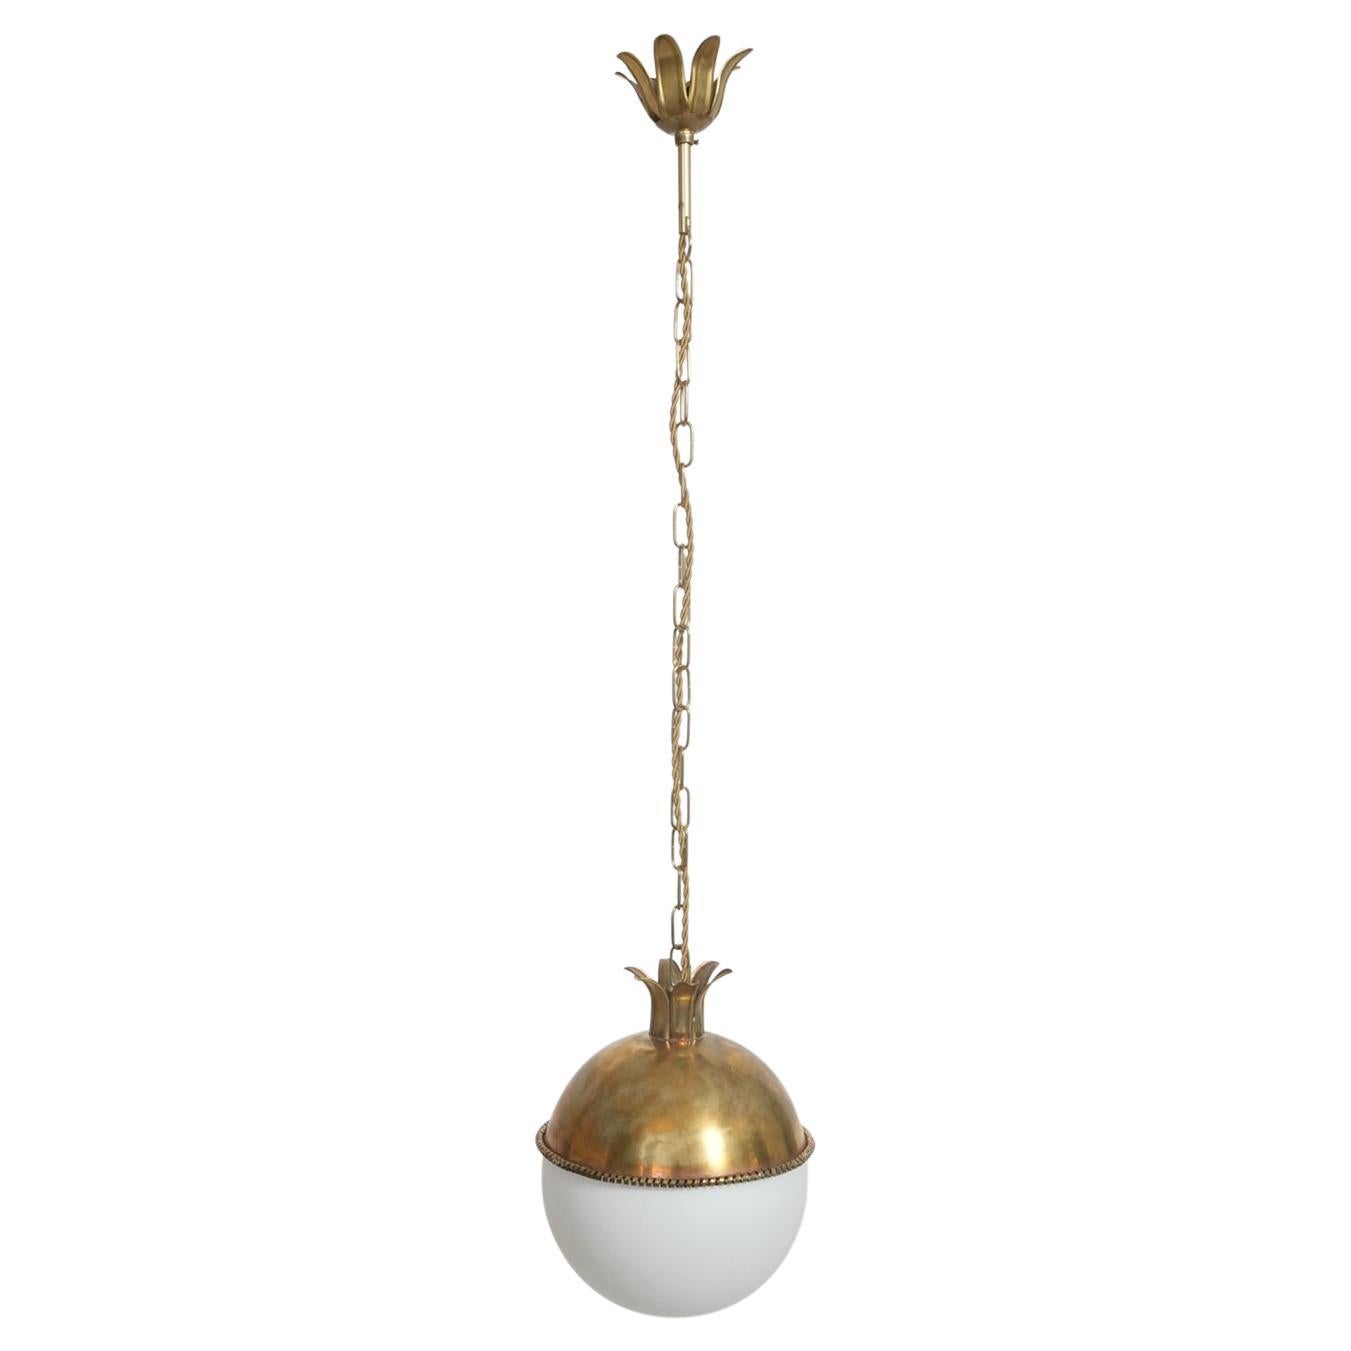 "Granada" brass and white opaline ceiling lamp, Barracuda Edition. For Sale